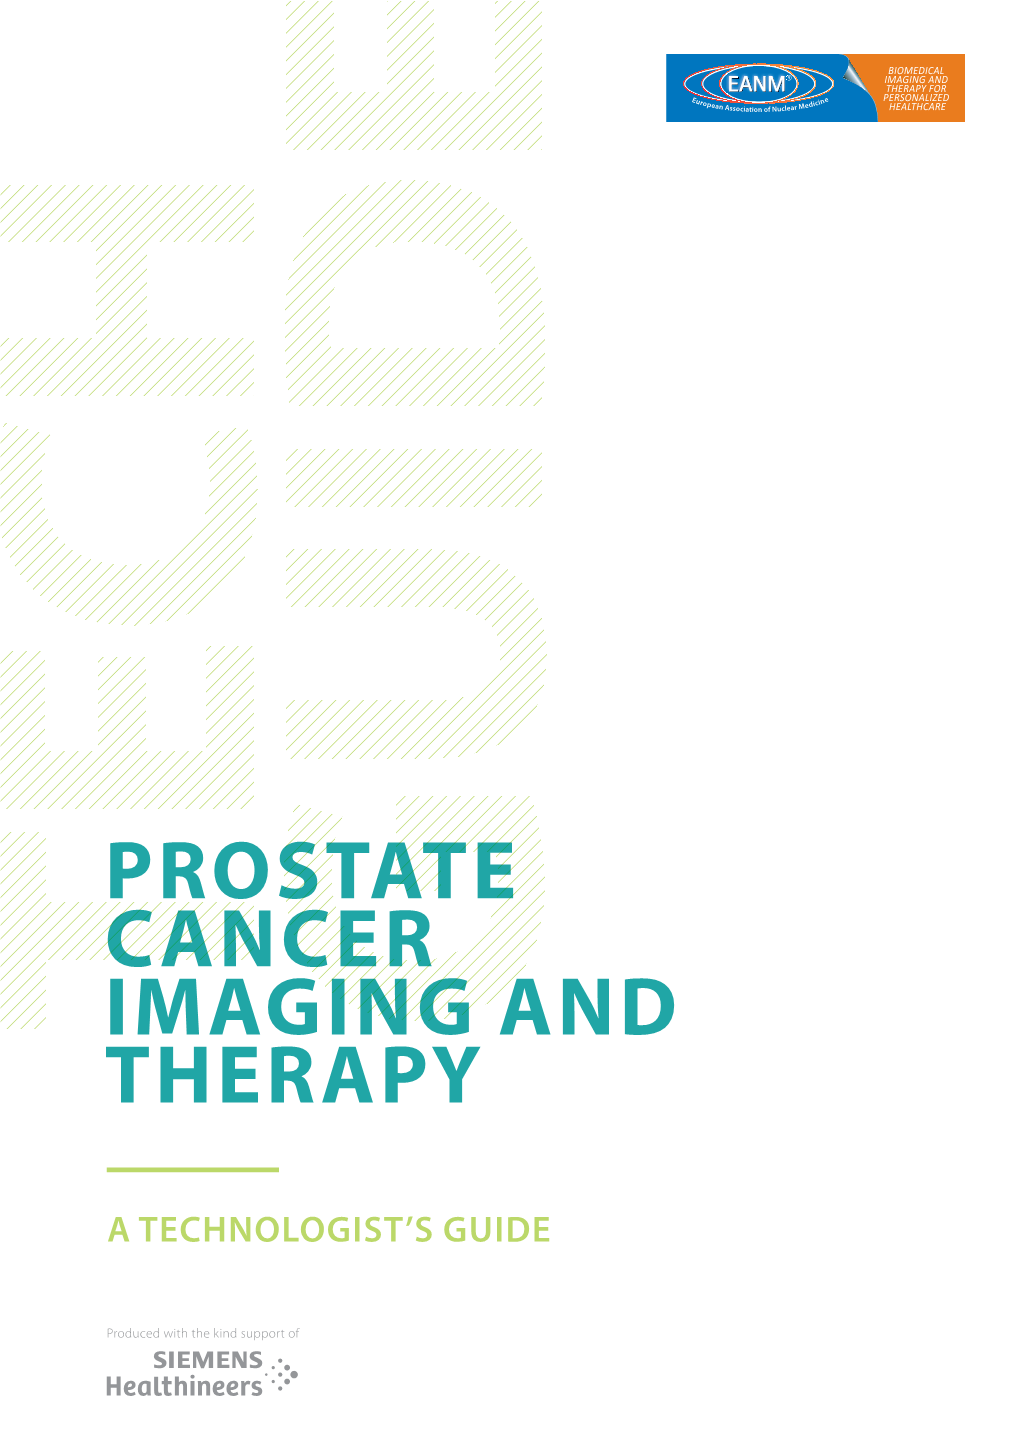 Prostate Cancer Imaging and Therapy